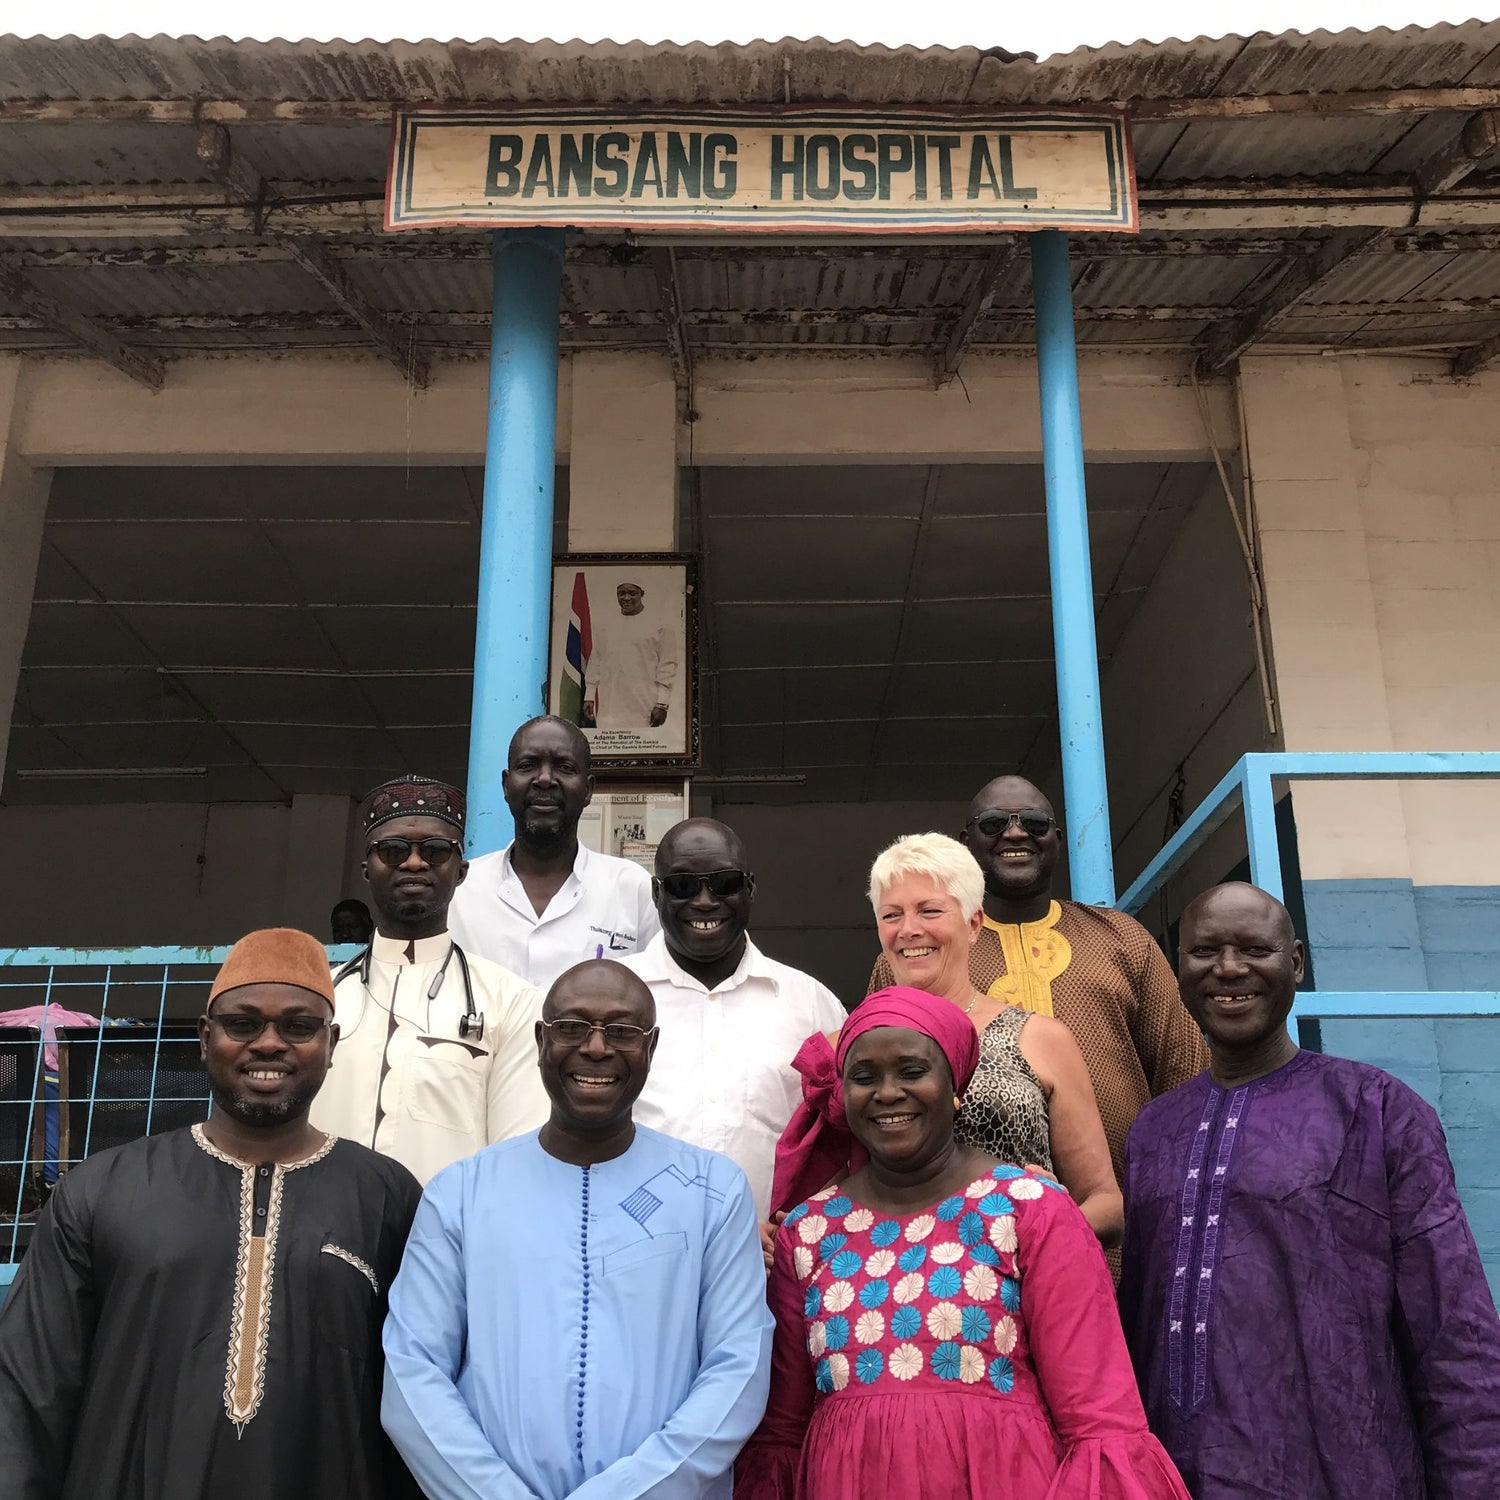 Anita and community standing in front of Bansang Hospital